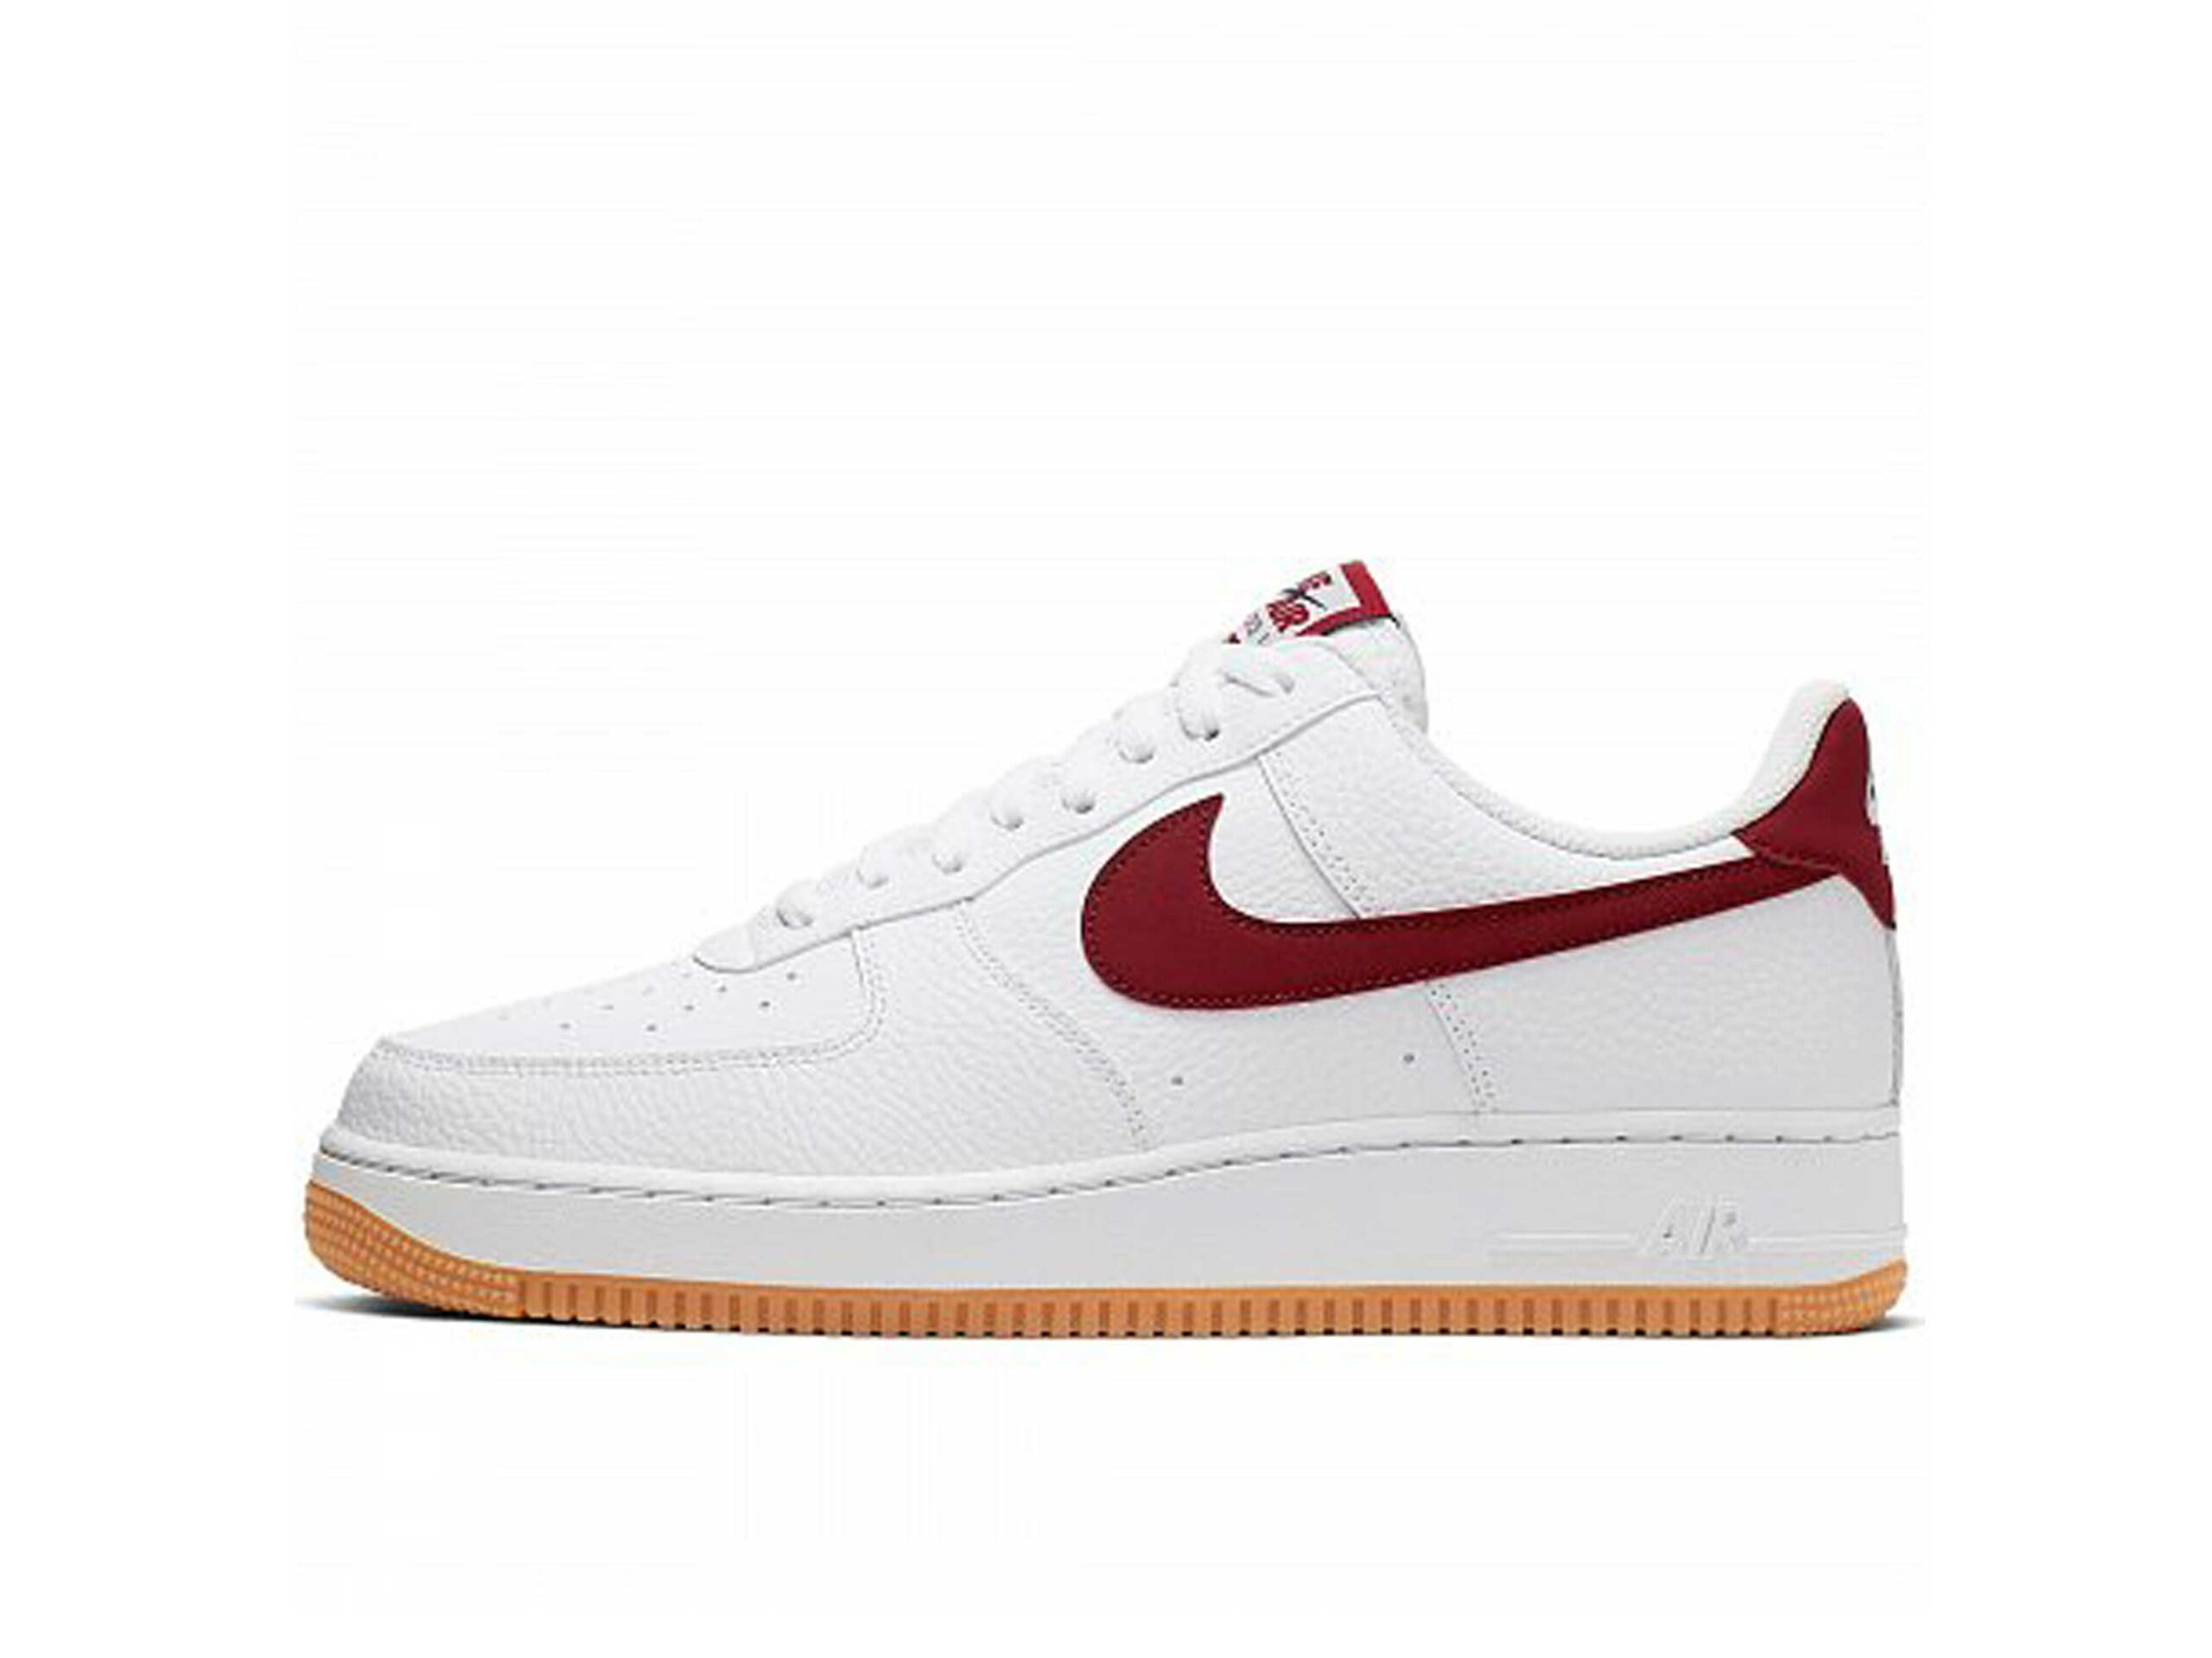 red gum bottom air force 1